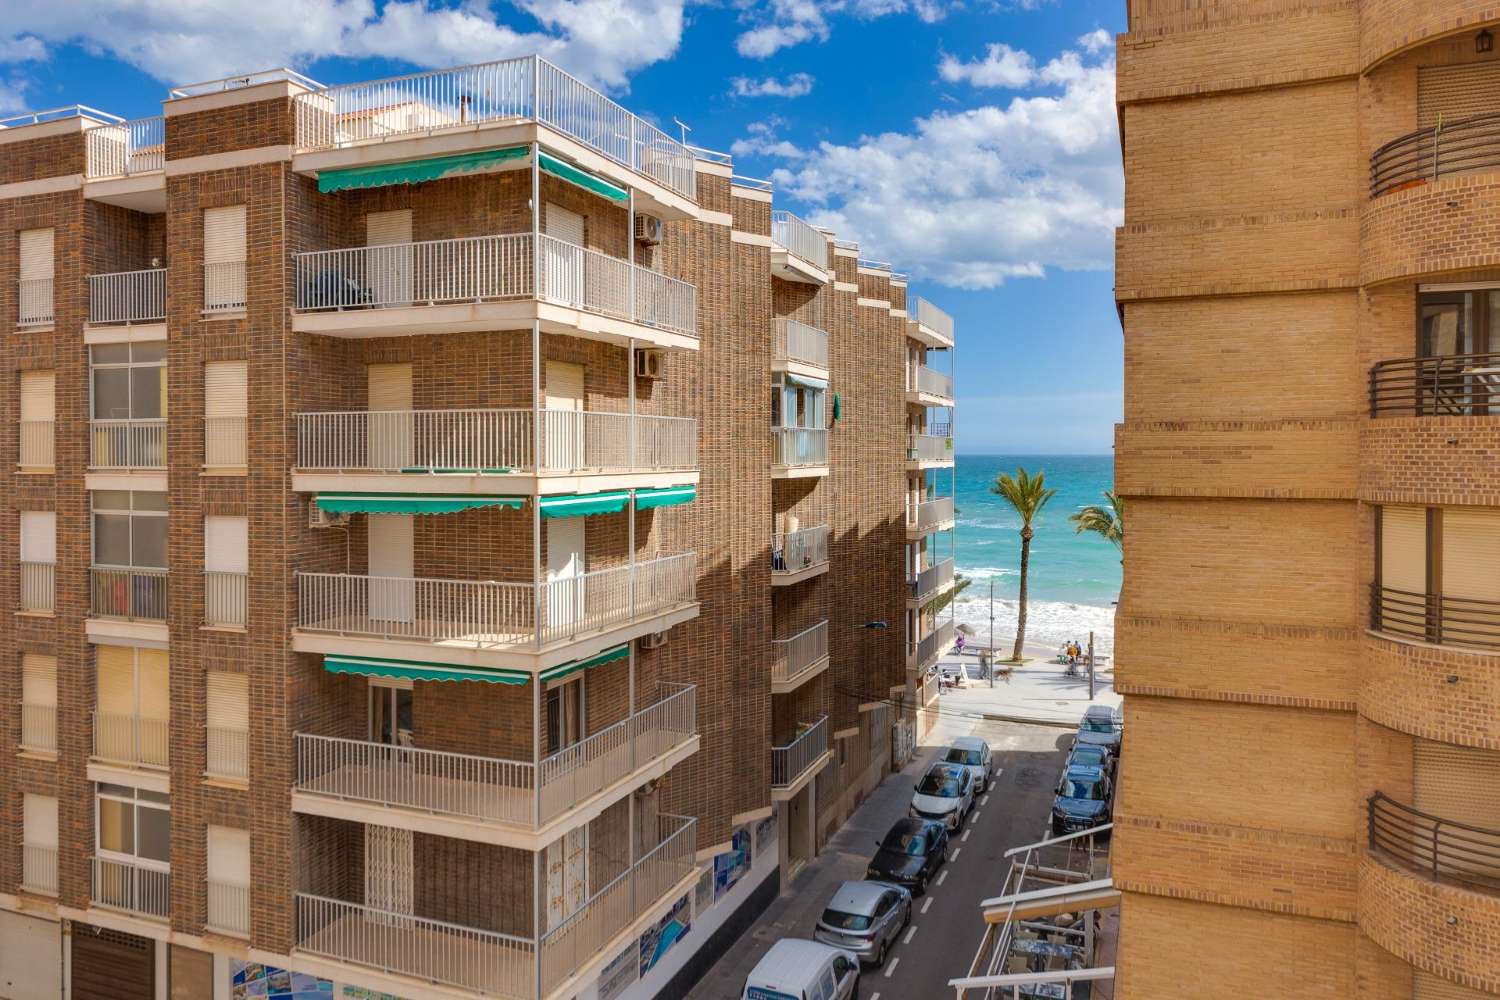 Apartment 3 bedrooms 2 bathrooms front sea views on the second line of Cura beach with garage